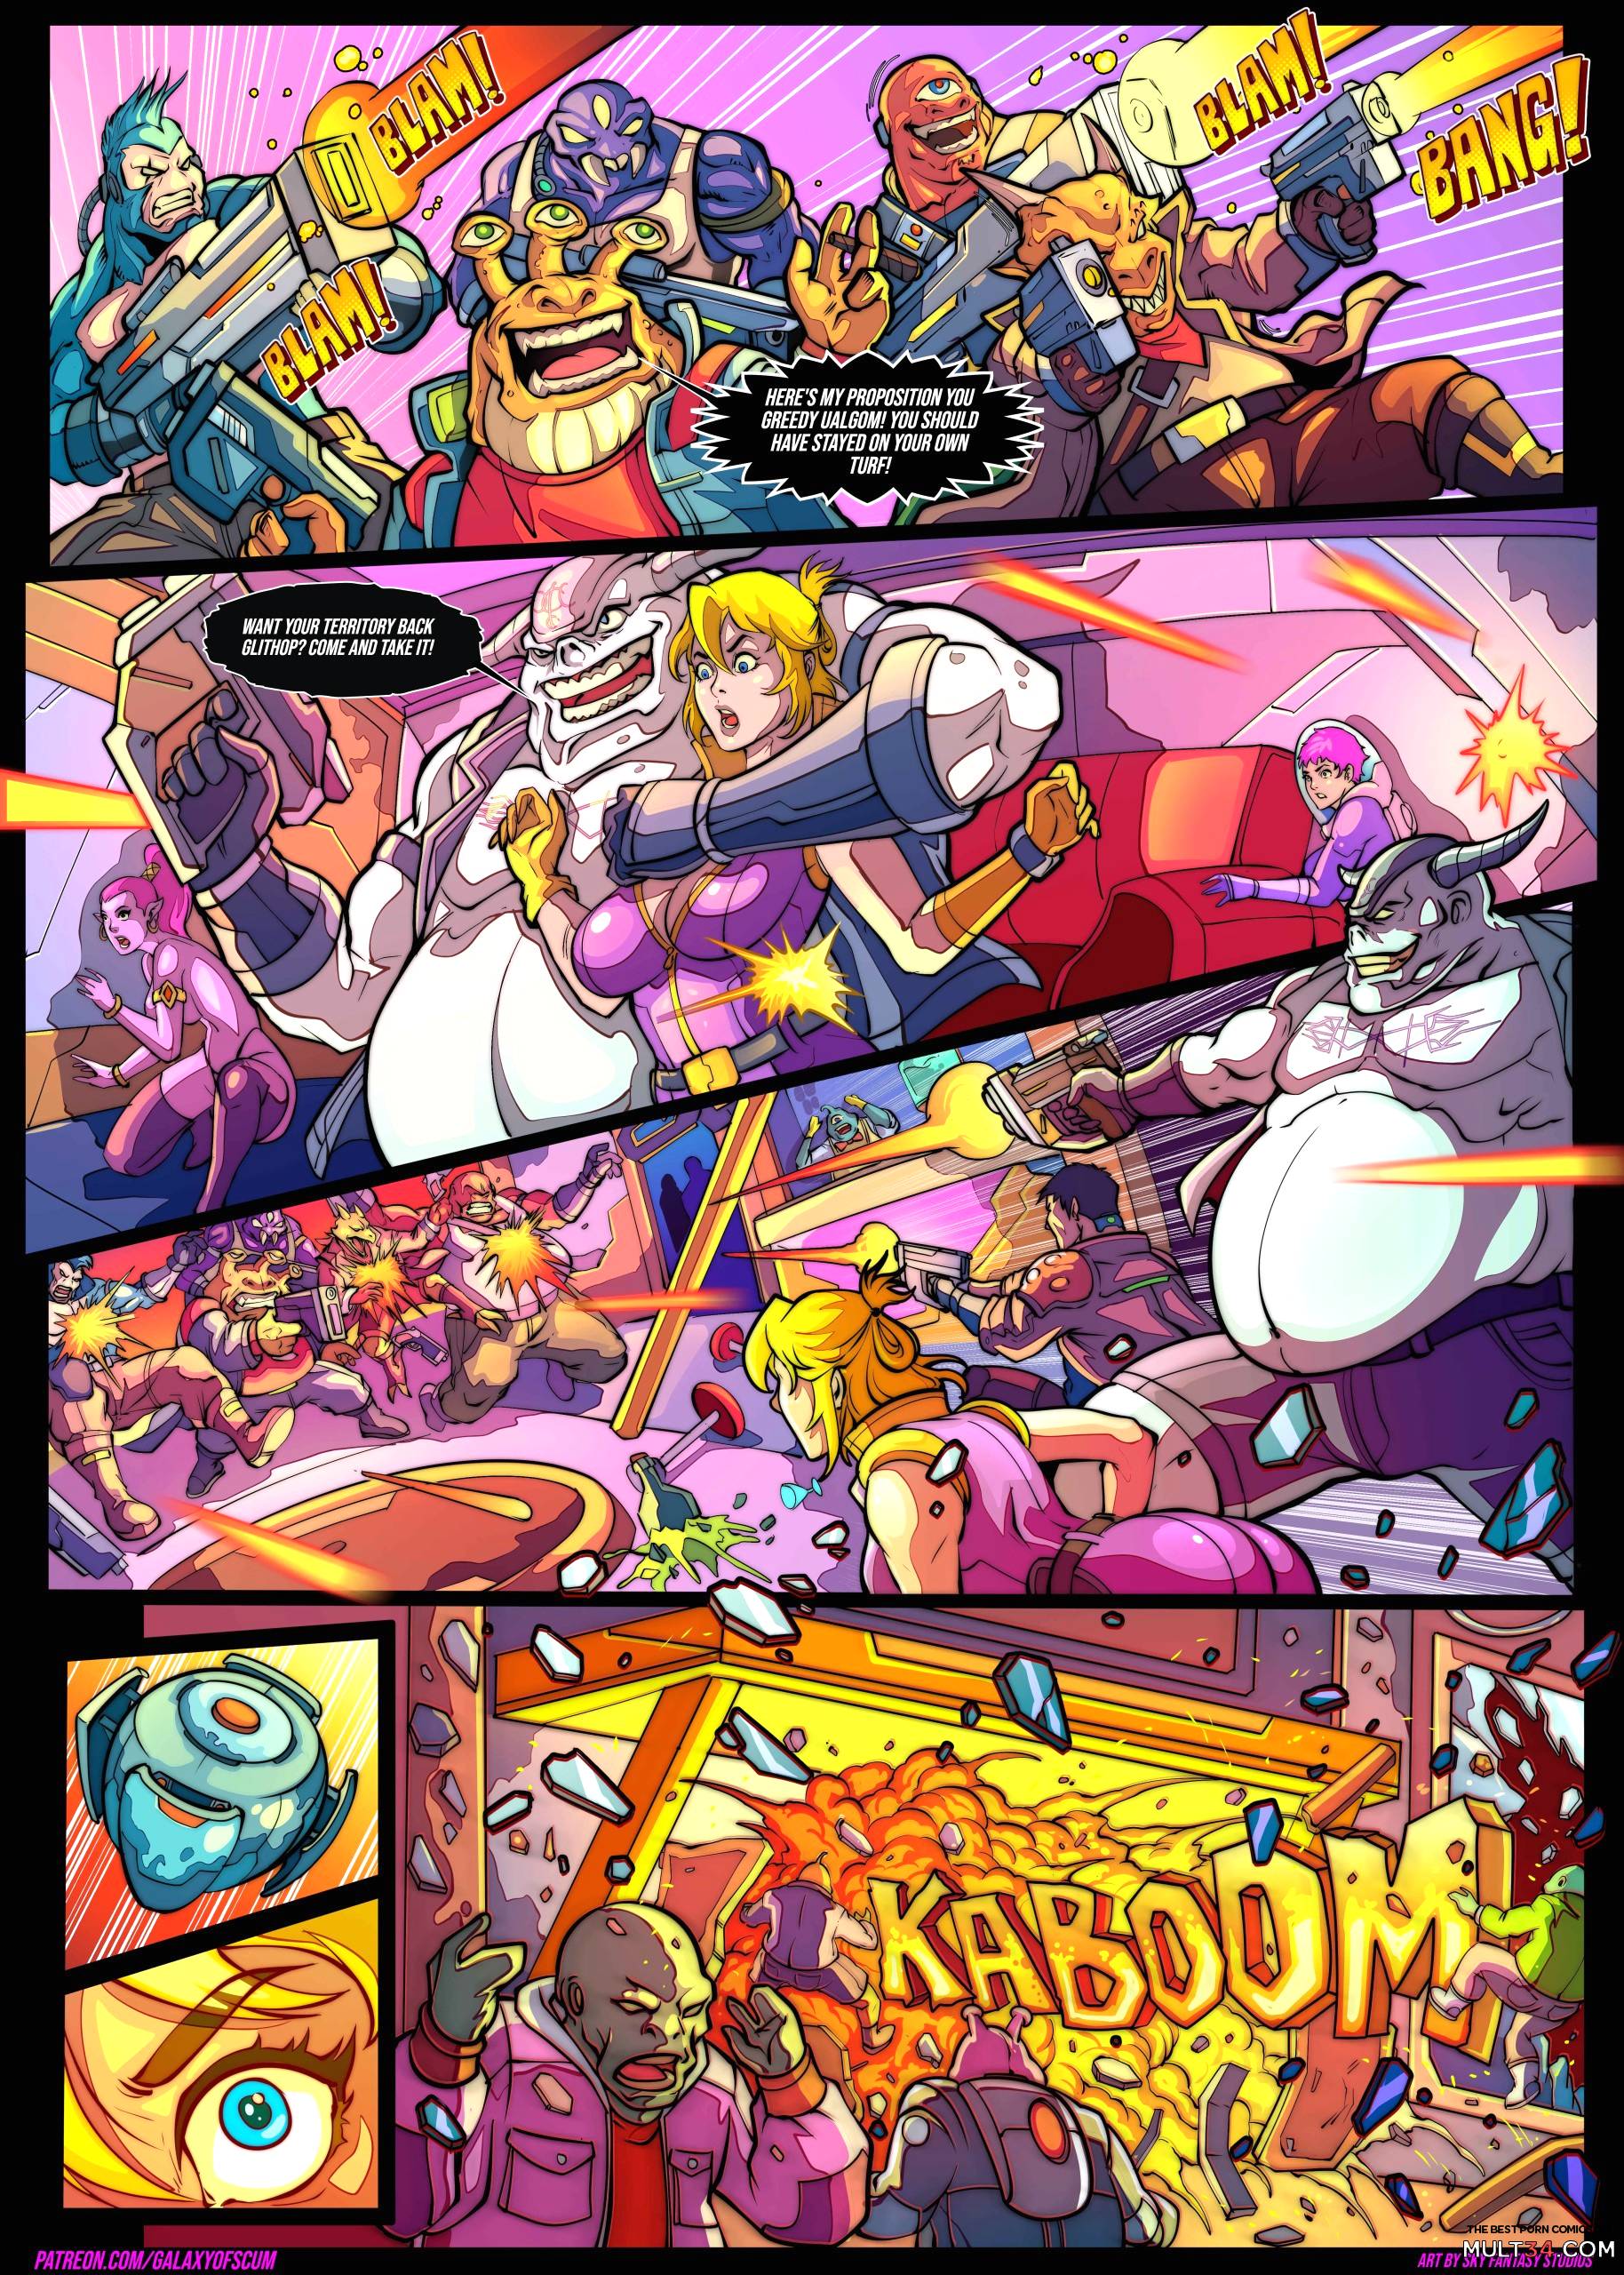 Galaxy of Scum Issue 2: Smuggler's and Bugs page 12